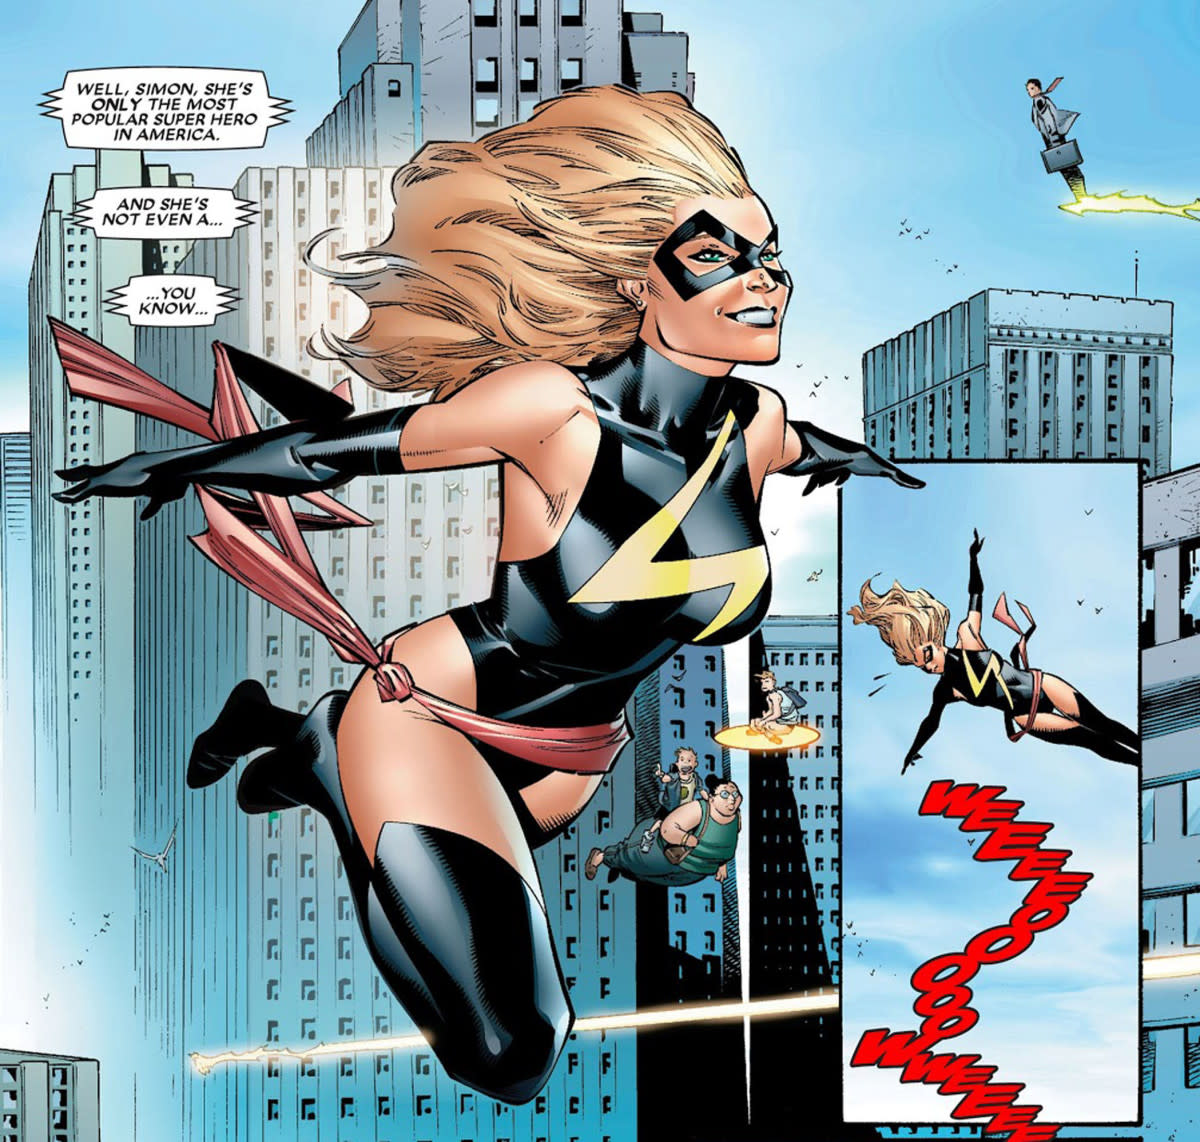 House of M #2 introduces Carol Danvers in the comic series. She is not named Captain Marvel in this issue. However, she is named as such in the very next issue as shown in the page below this panel.